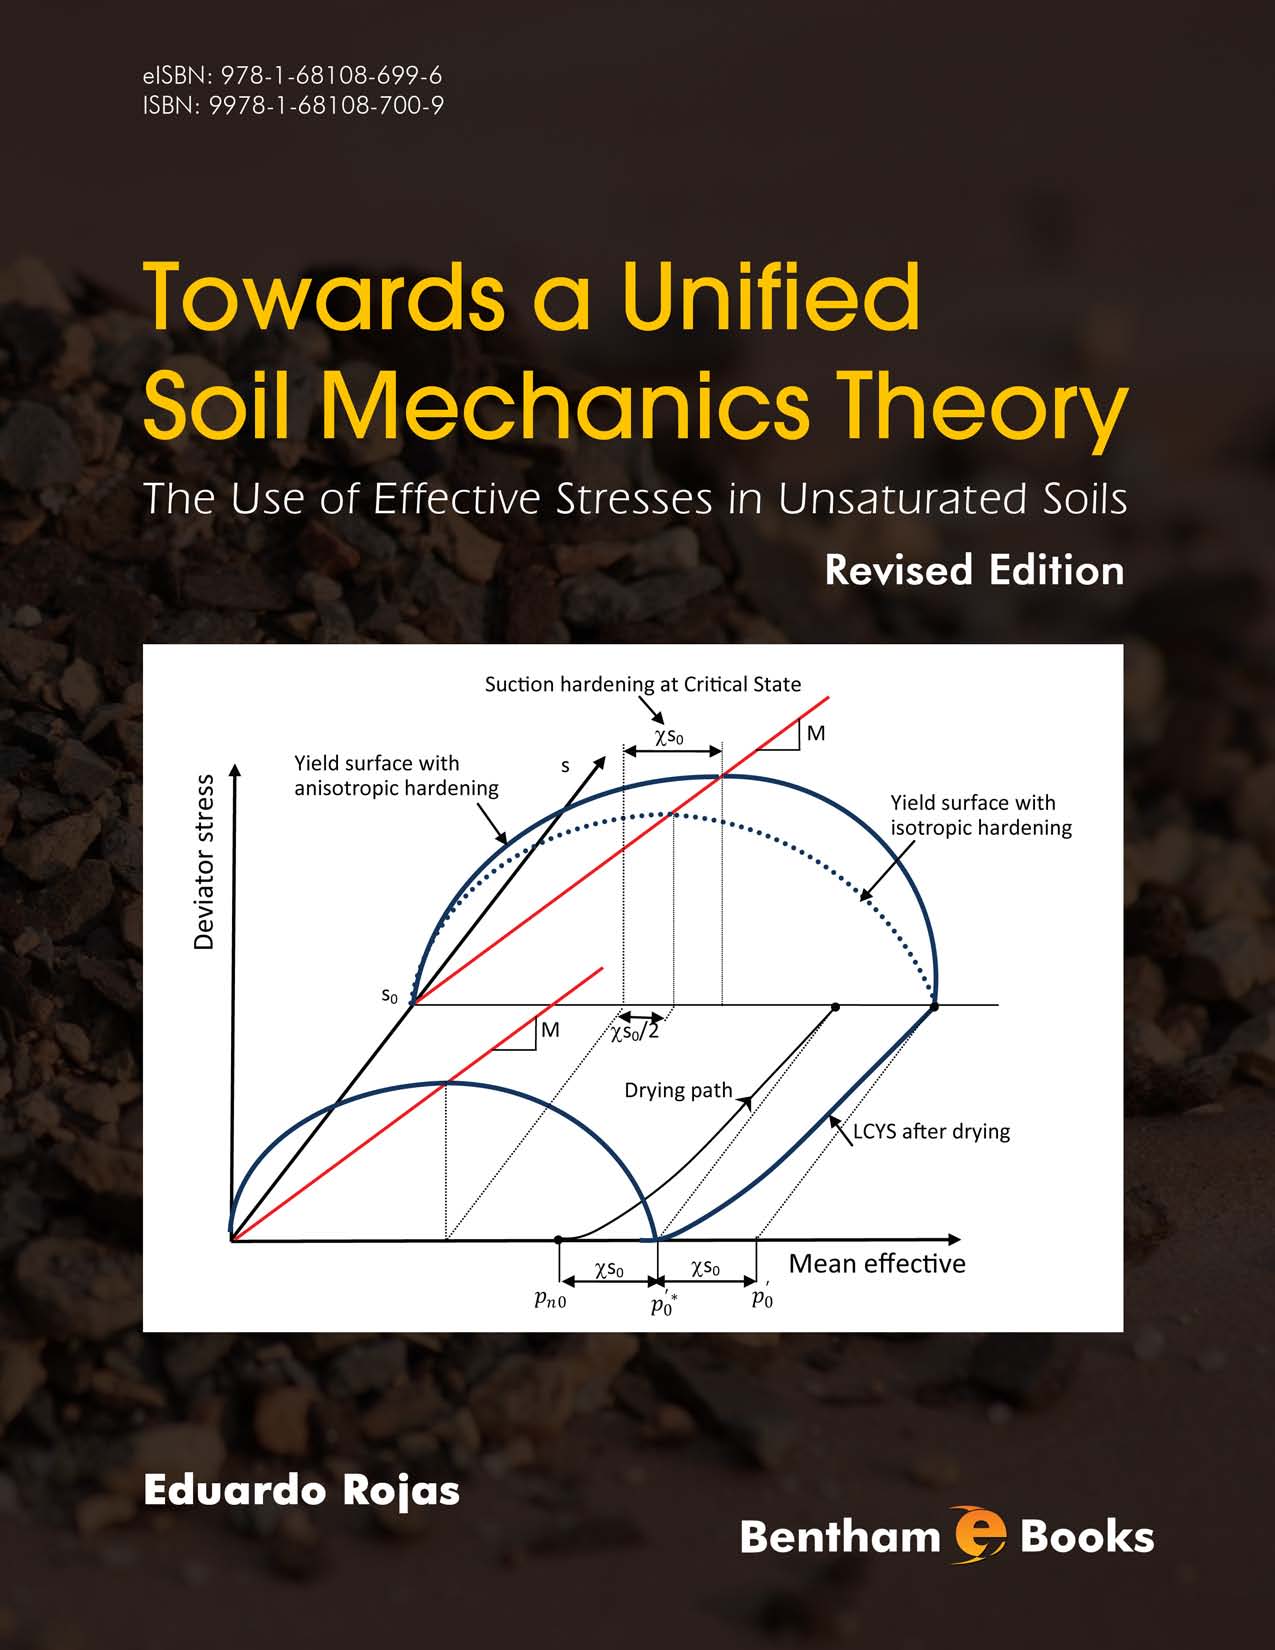 Towards a Unified Soil Mechanics Theory: The Use of Effective Stresses in Unsaturated Soil, Revised Edition